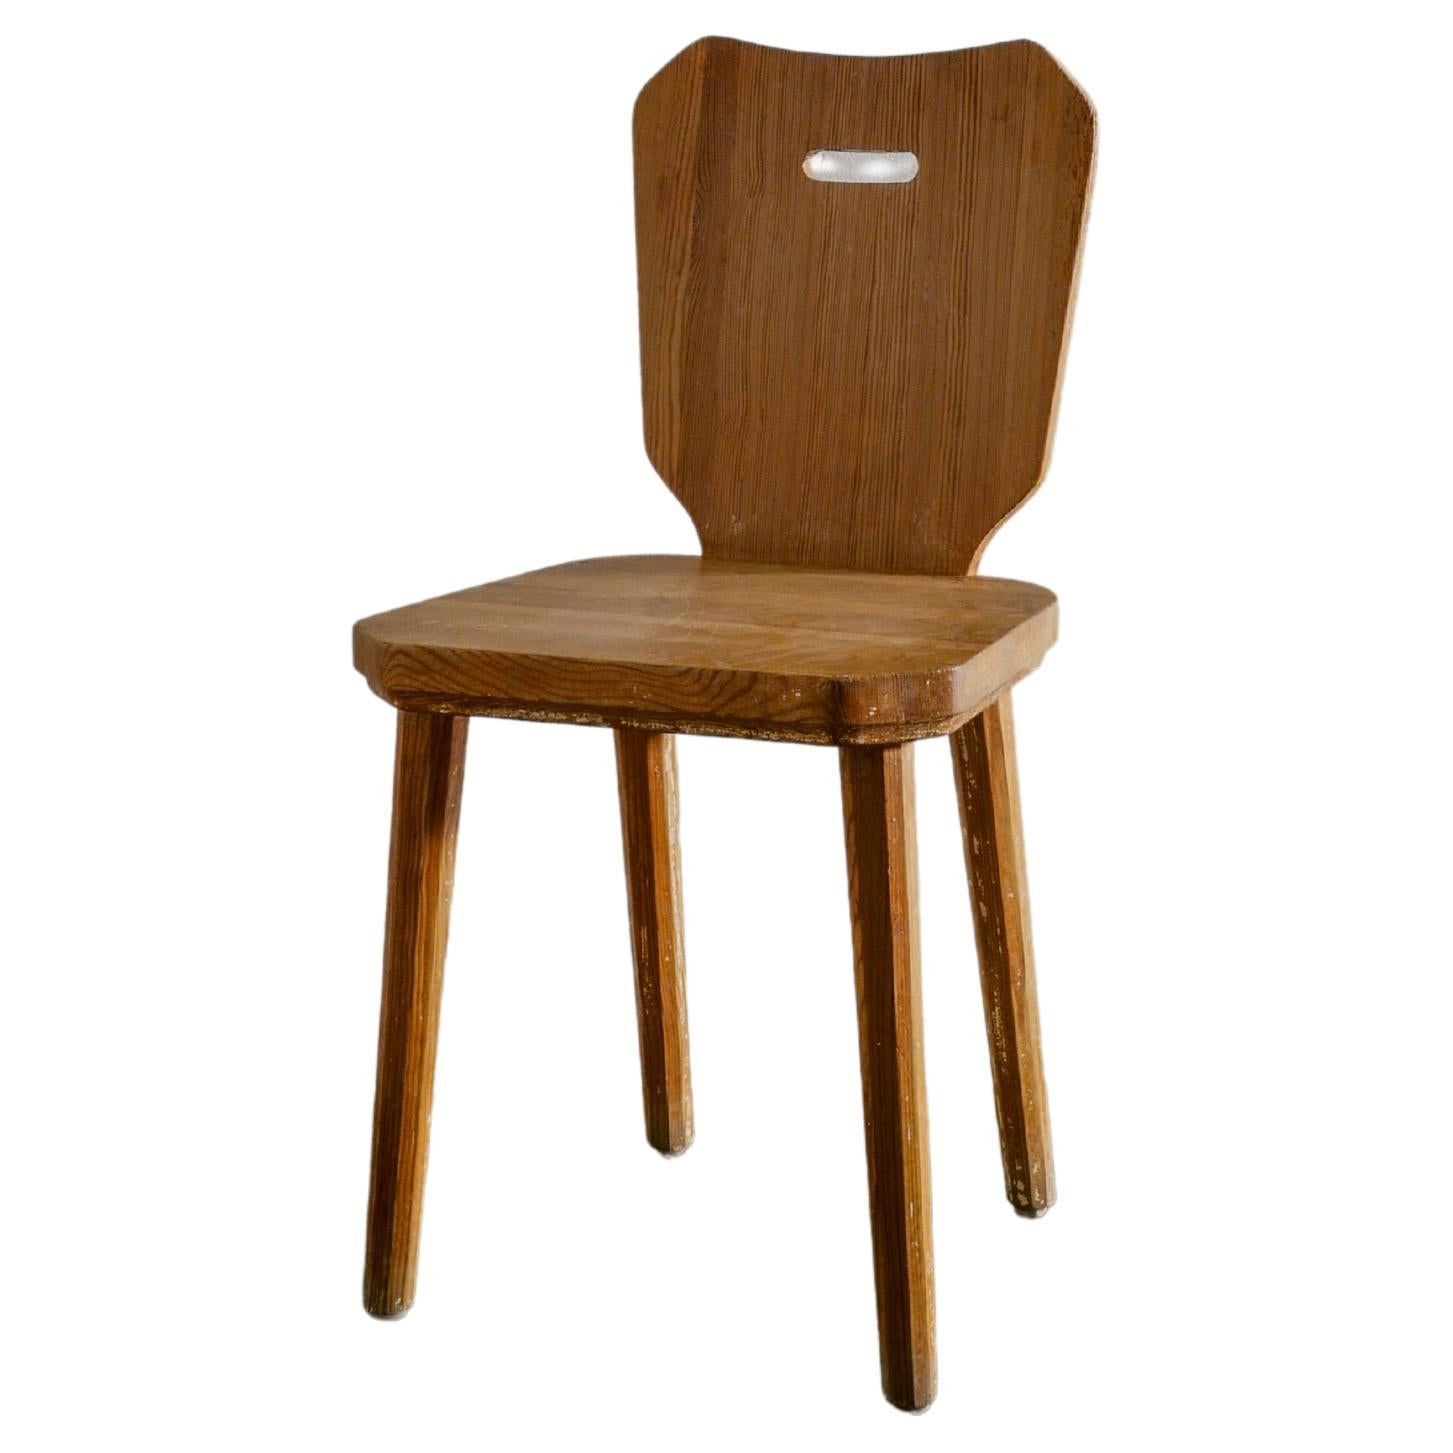 Göran Malmvall Dining Office Chair in Pine Produced in Sweden, 1940s For Sale